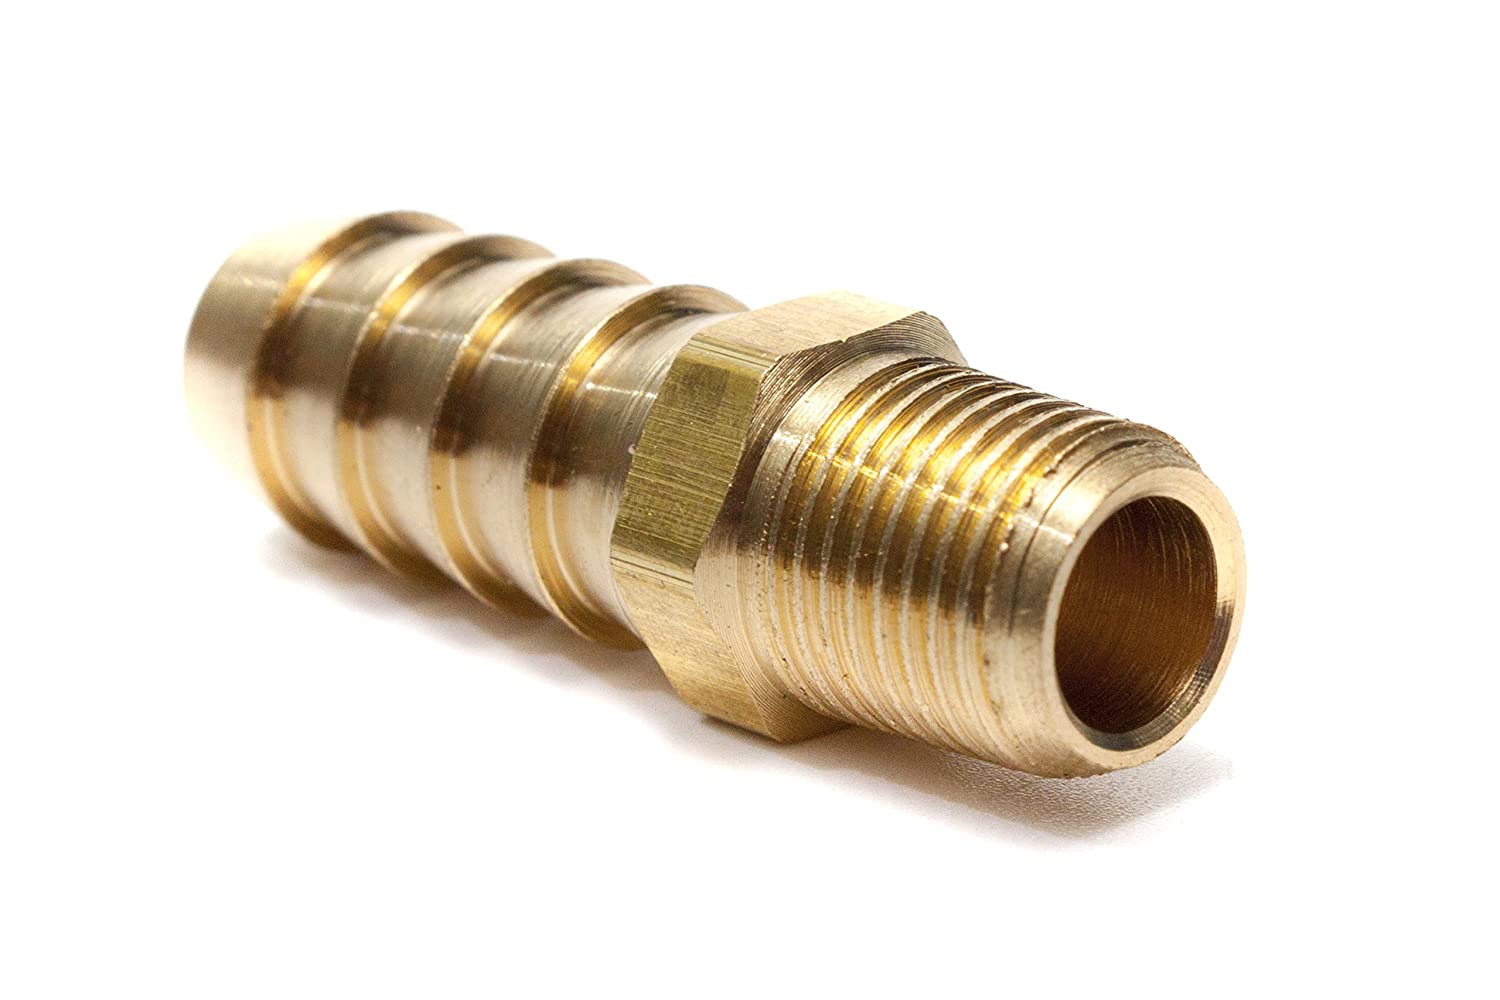 LTWFITTING Brass Fitting Coupler 3/8-Inch Hose Barb x 1/8-Inch Male NPT Fuel Gas Water(Pack of 5)